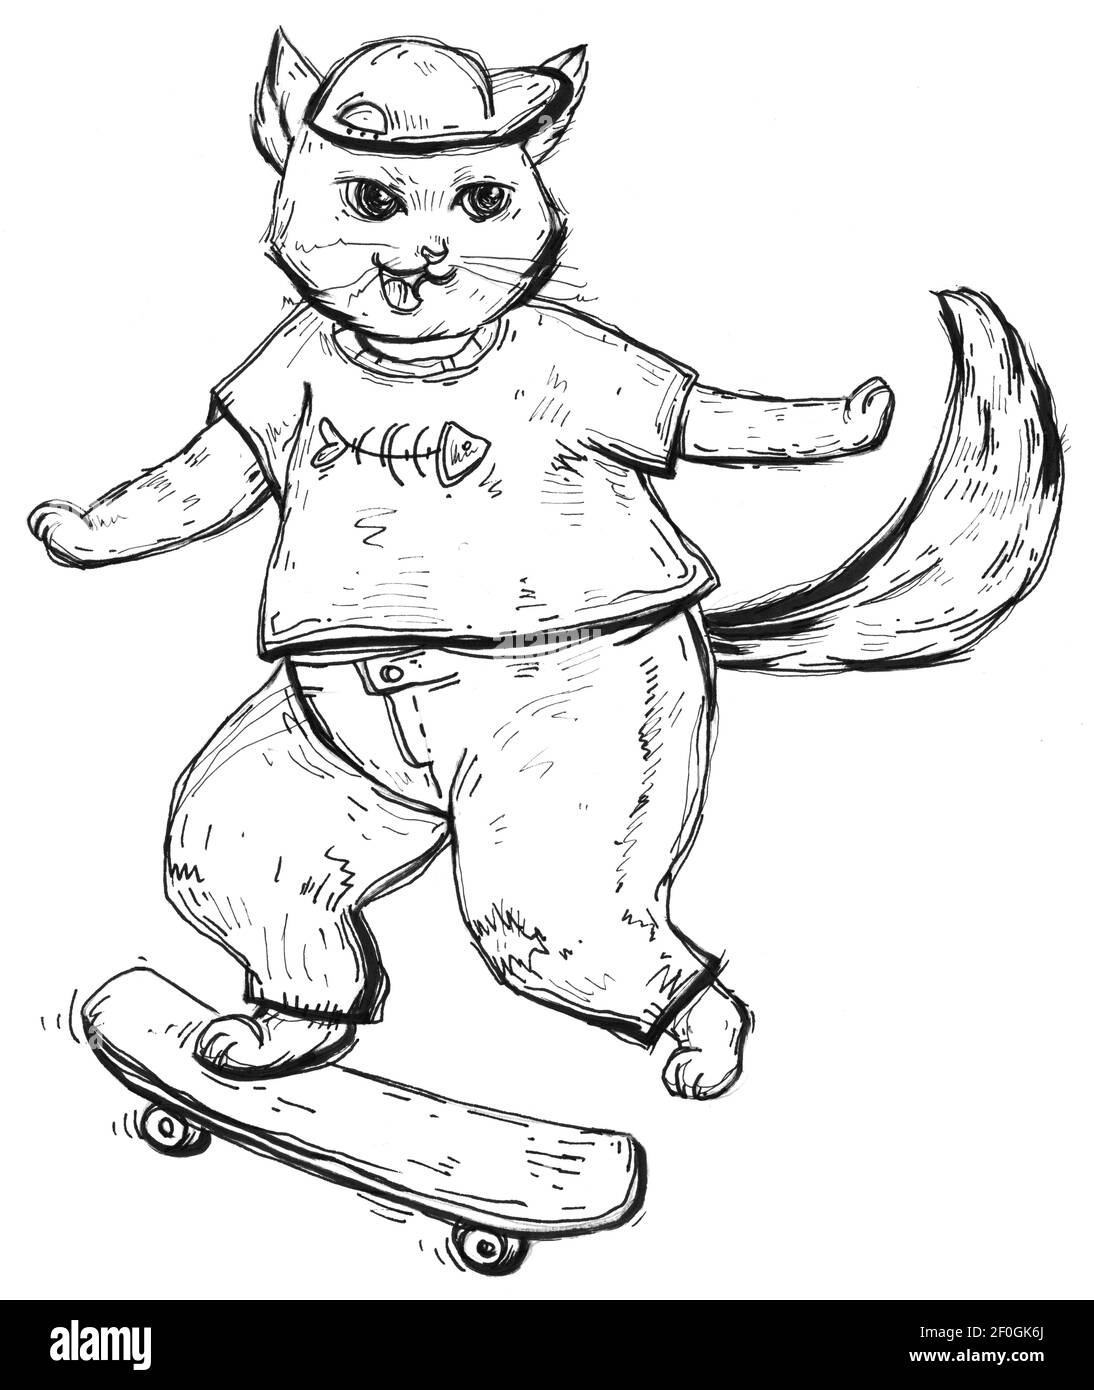 Cat dressed in t-shirt and cap is riding a skateboard. Vintage monochrome hatching illustration isolated on white background. Hand drawn design elemen Stock Photo